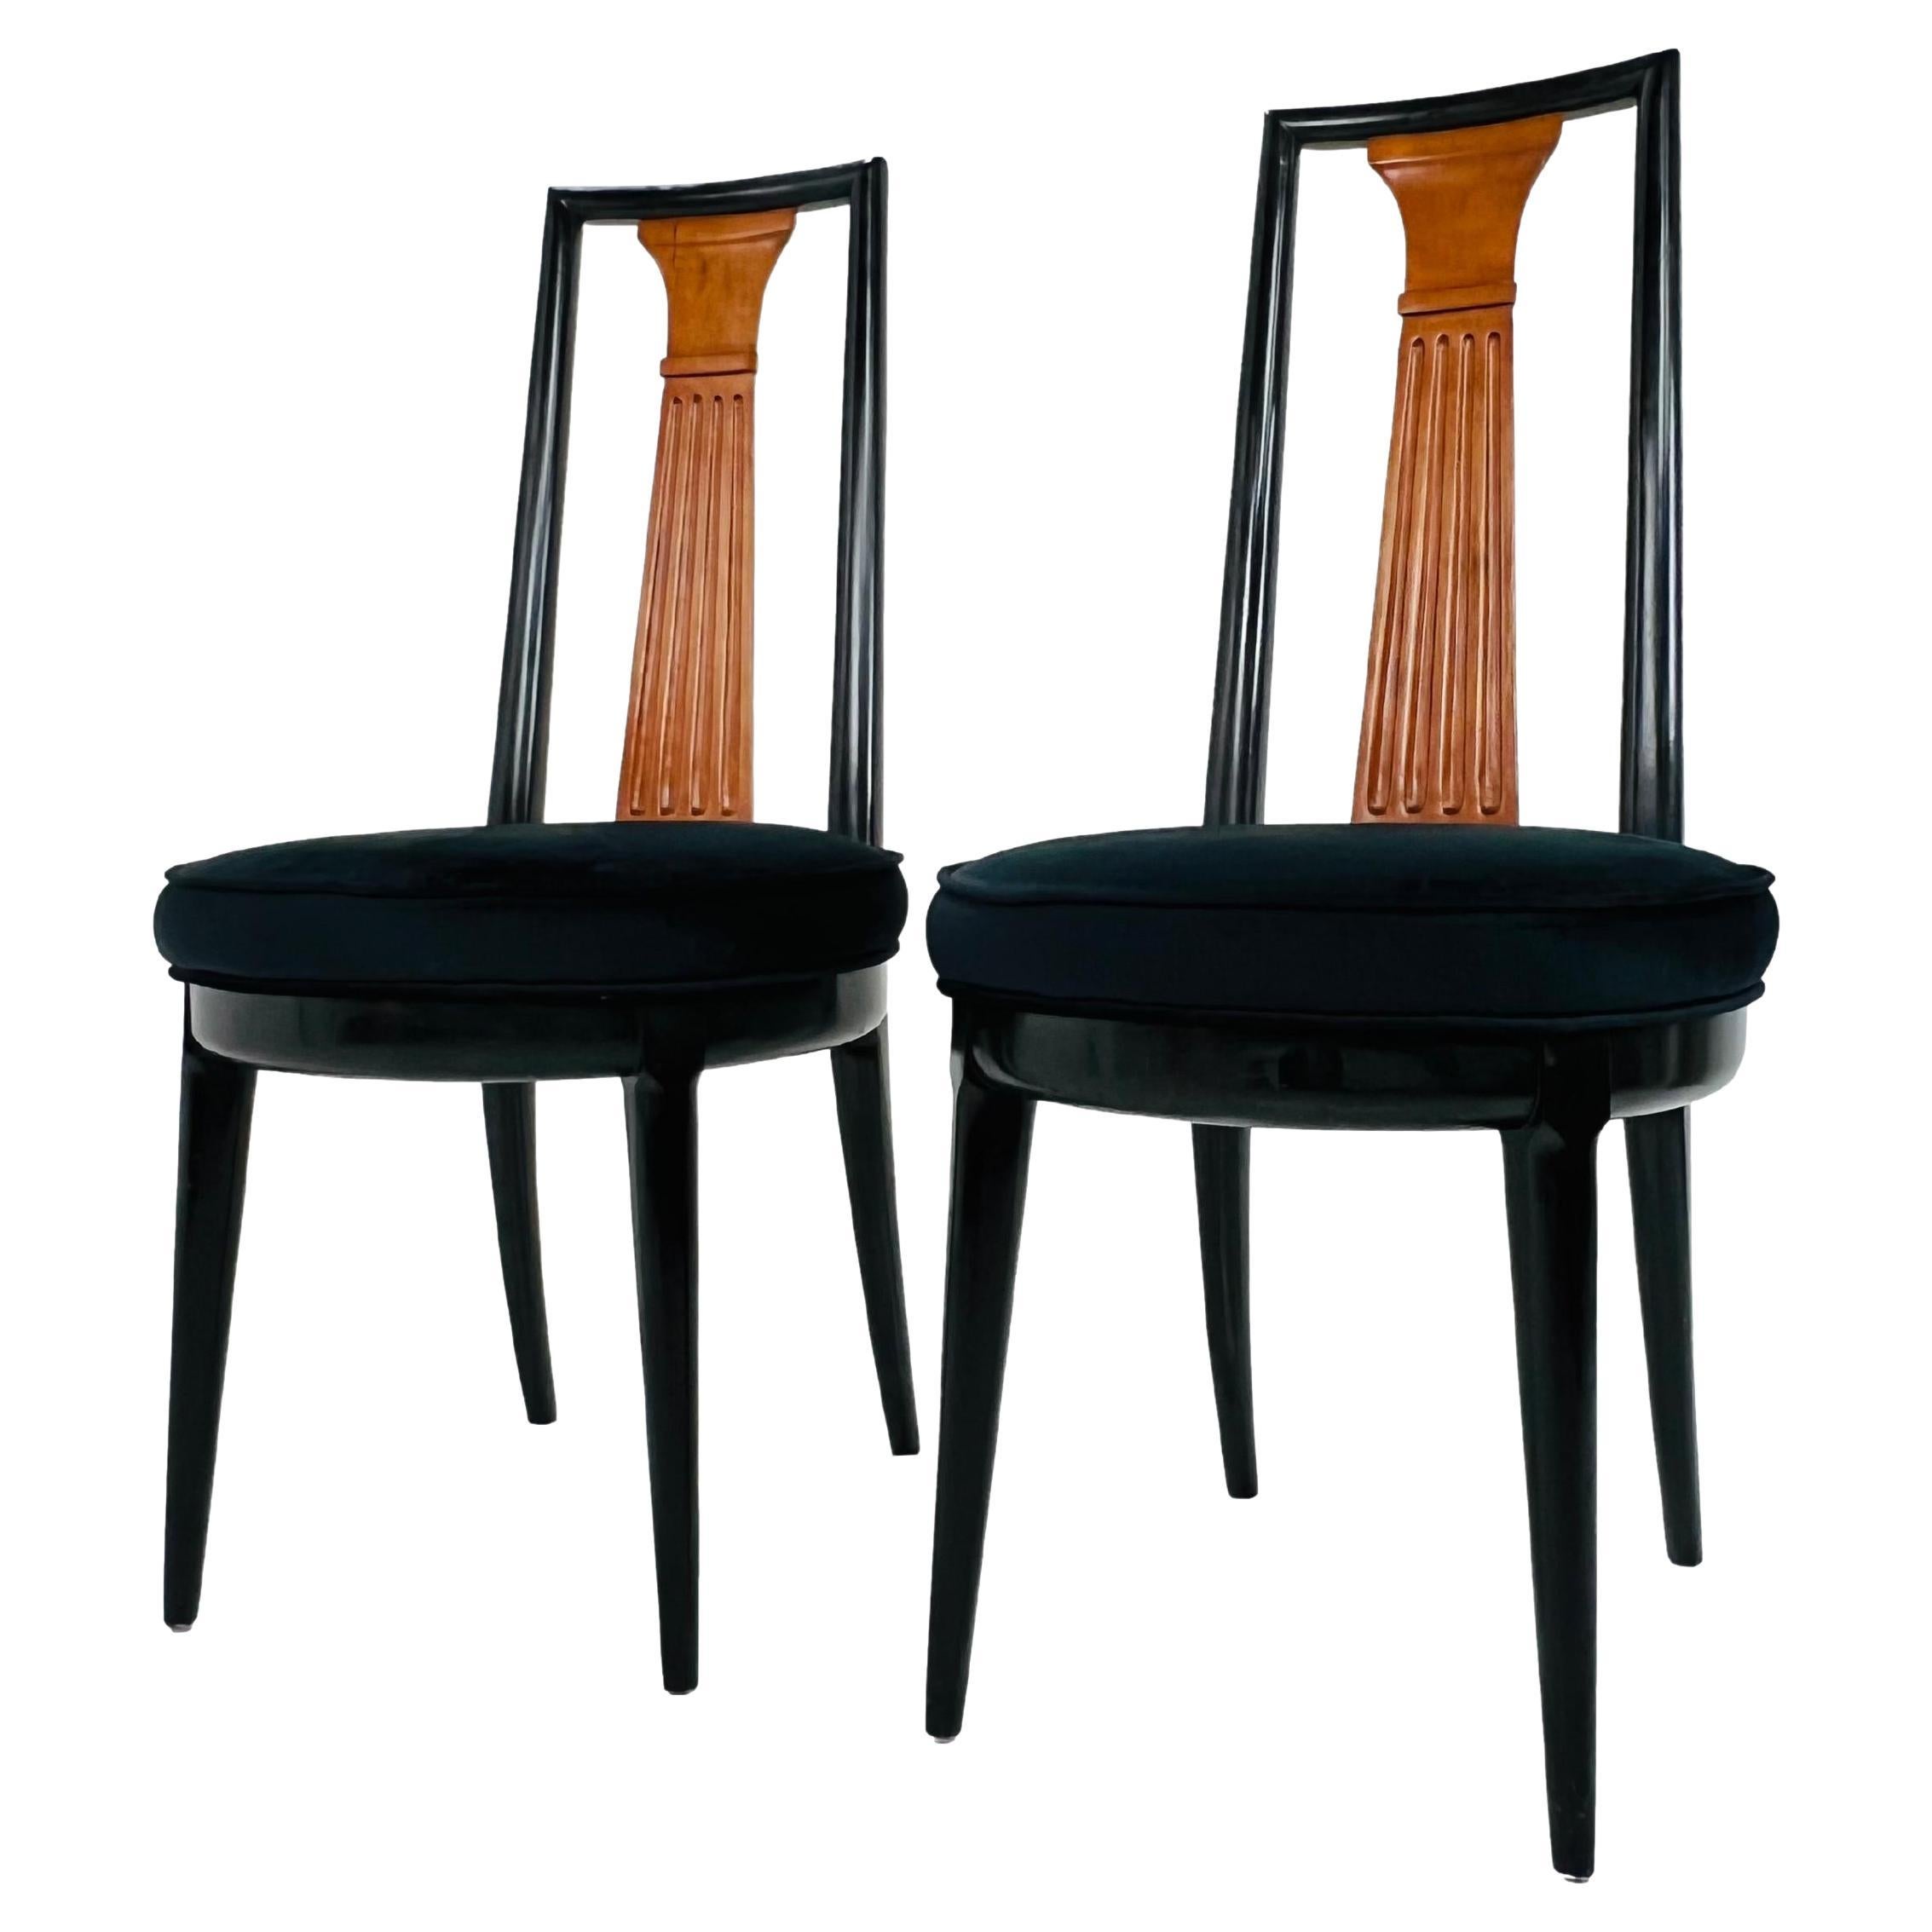 Pair of Tomlinson “Sophisticate Collection” No.63 Dining Chairs